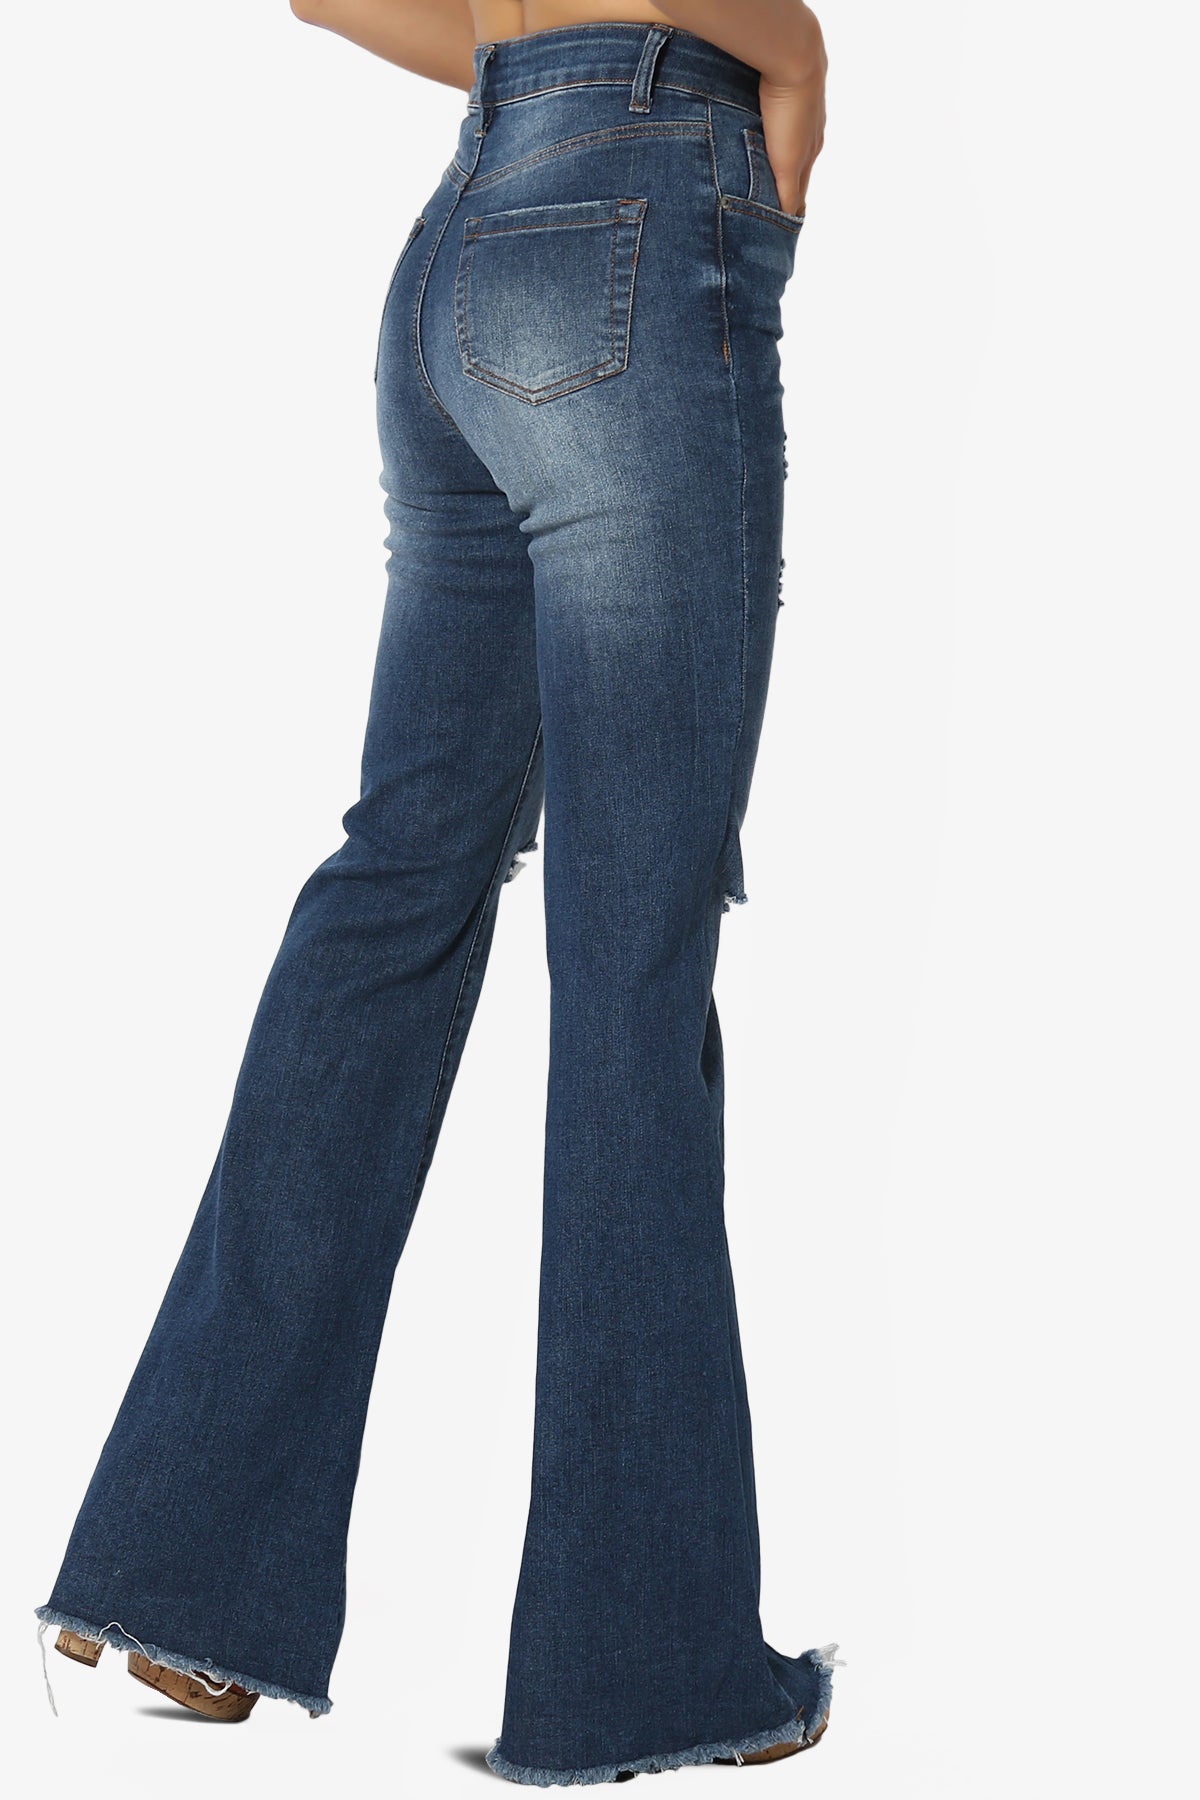 Snazzy High Rise Knee Destroy Flare Jeans DARK